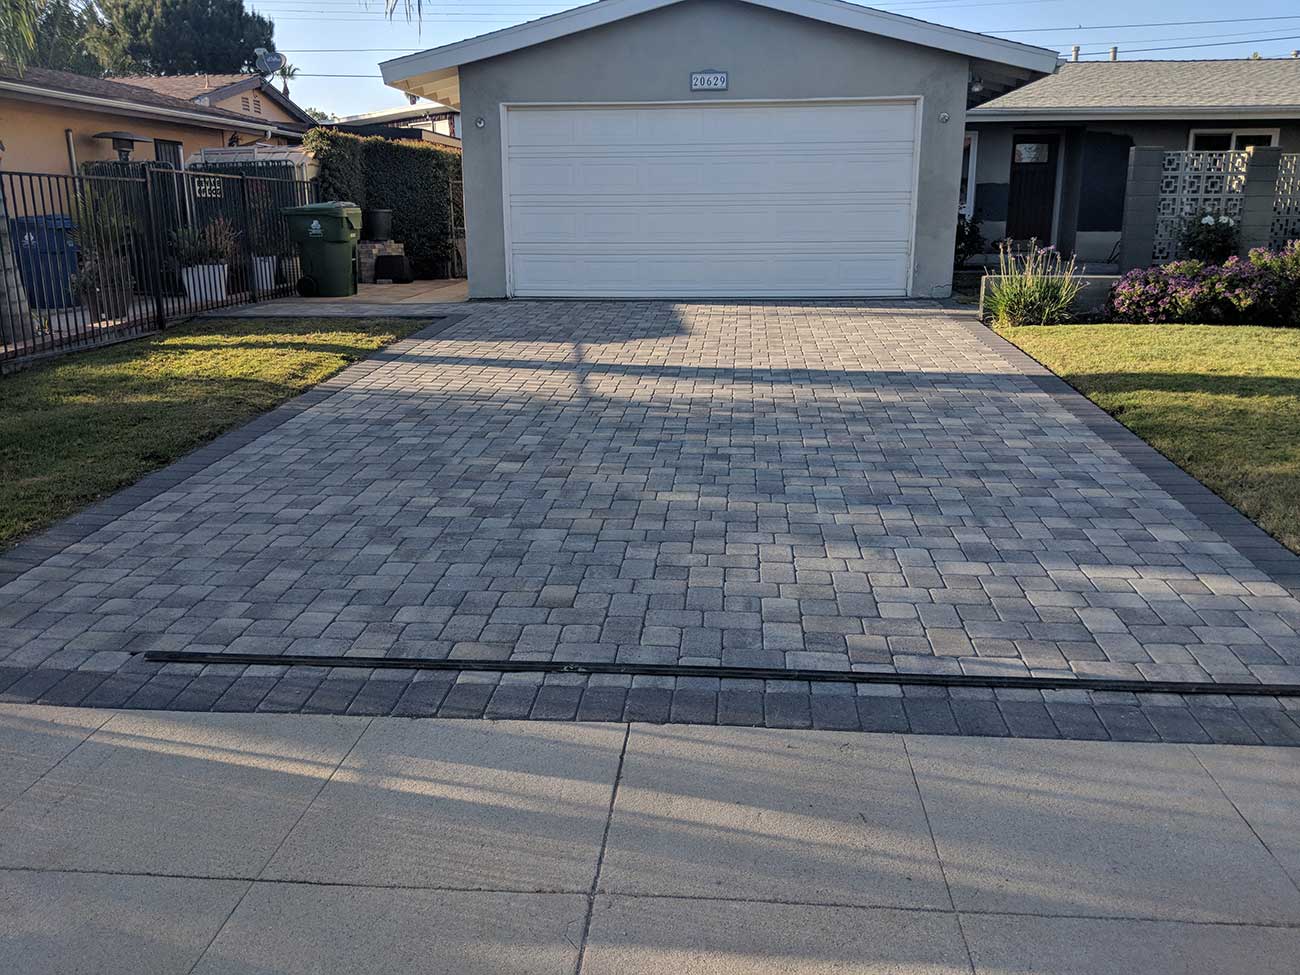 Angleus Antique Cobble paver driveway I and II in Gray Charcoal color